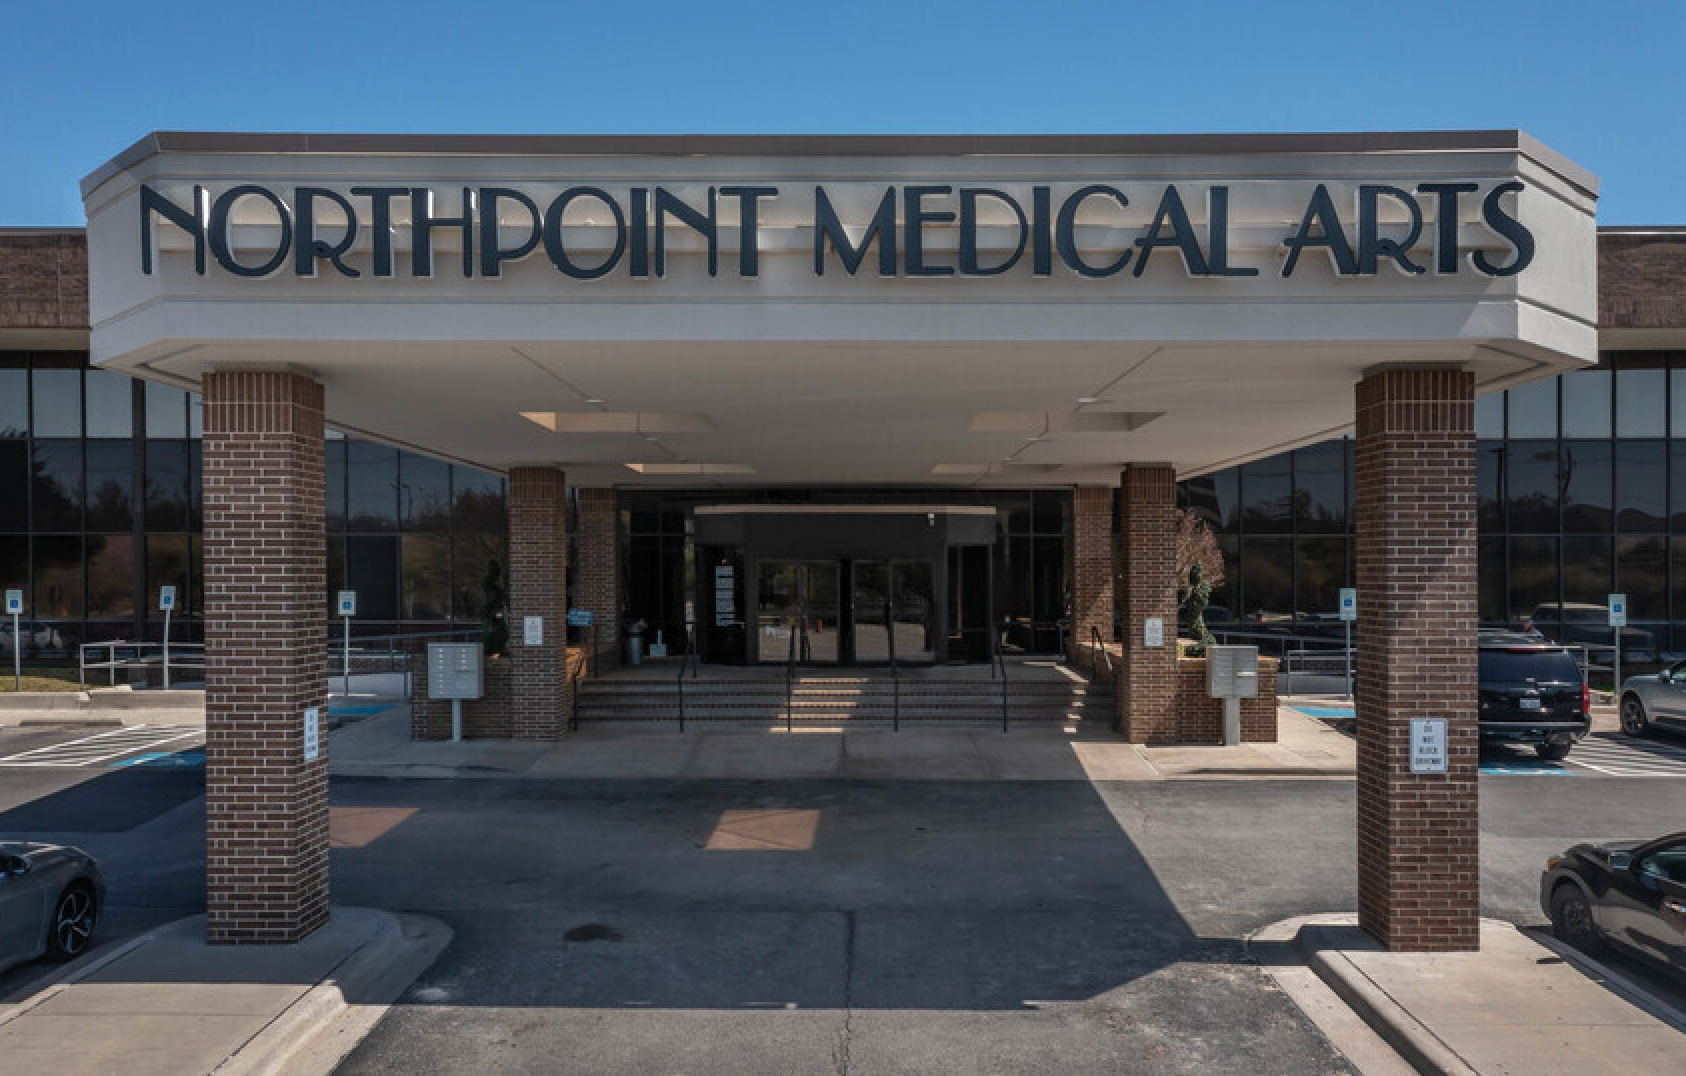 Image of Northpoint Medical Arts. Britely's location near Richardson, Texas.